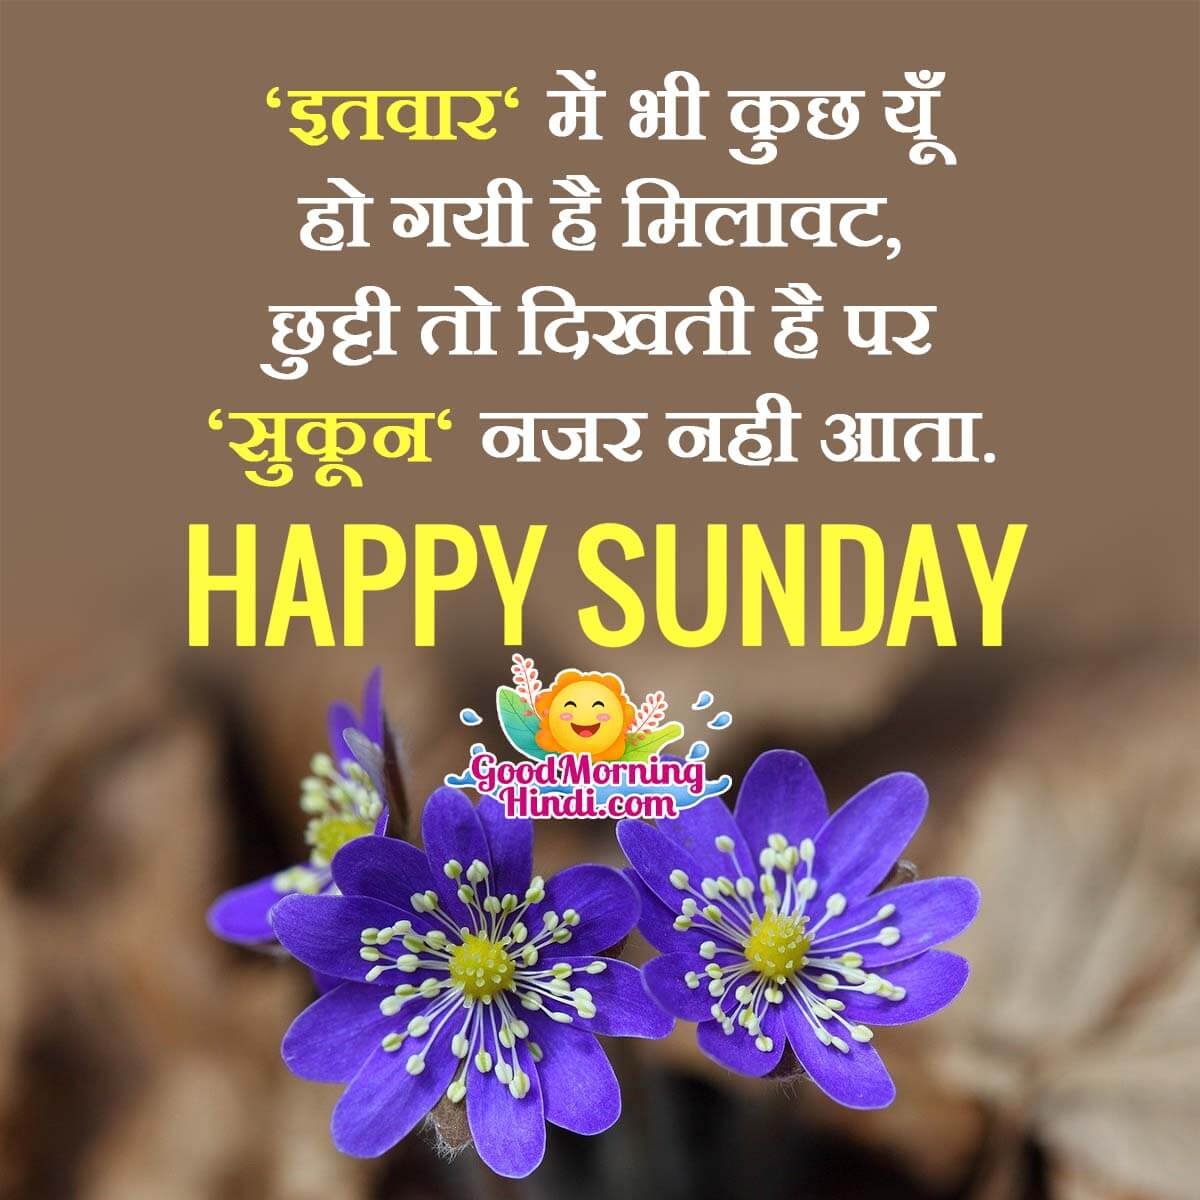 Happy Sunday Hindi Status Images - Good Morning Wishes & Images In ...